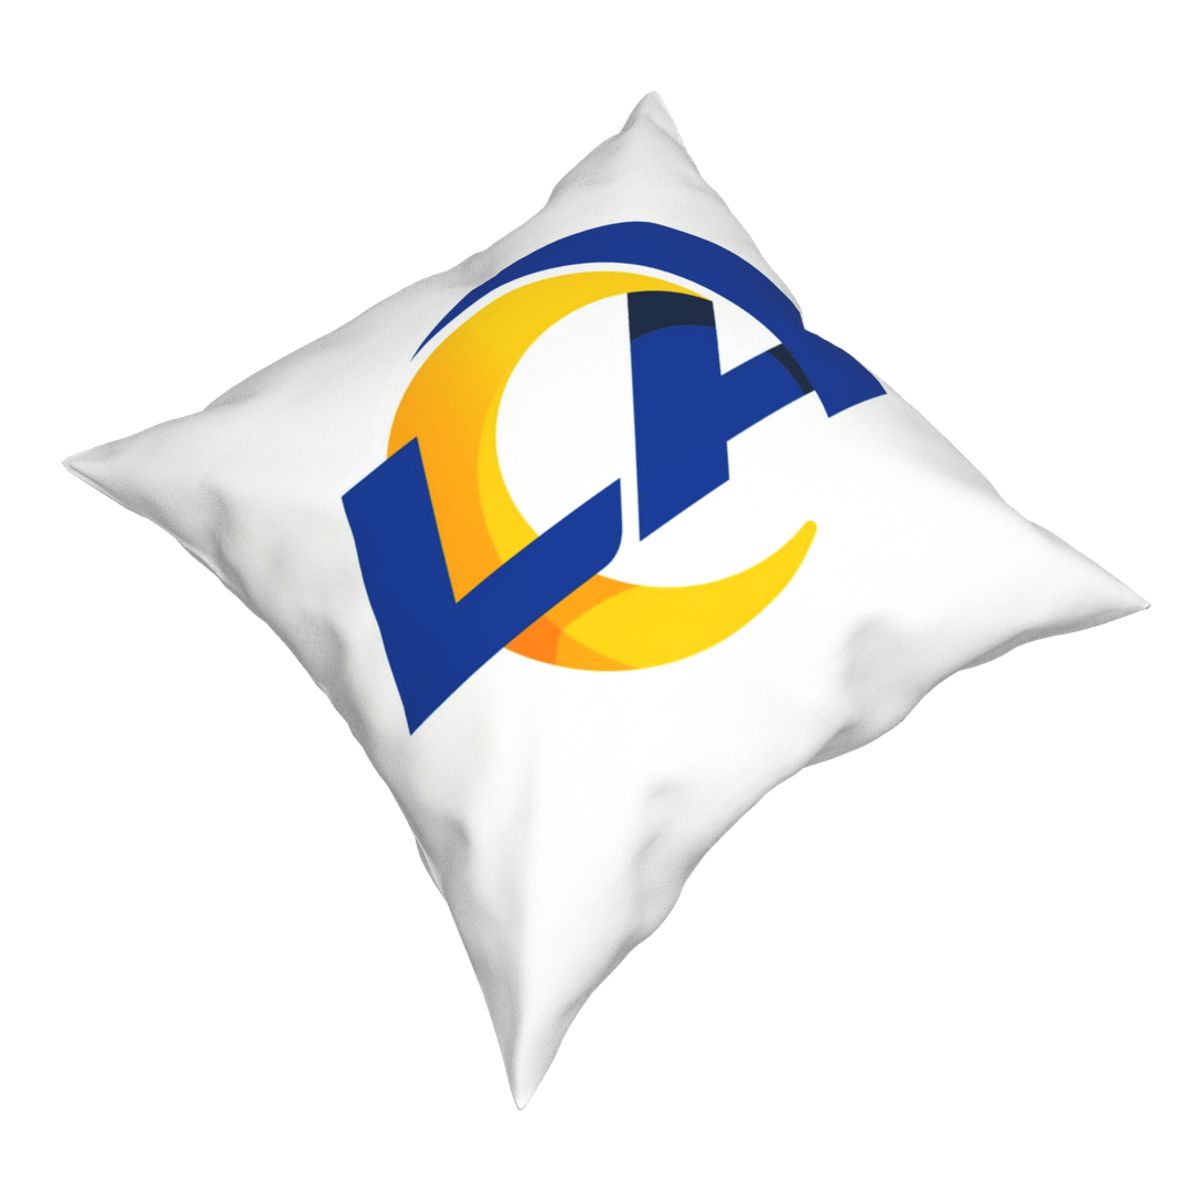 Custom Decorative Football Pillow Case 2020 New Los Angeles Rams White Pillowcase Personalized Throw Pillow Covers